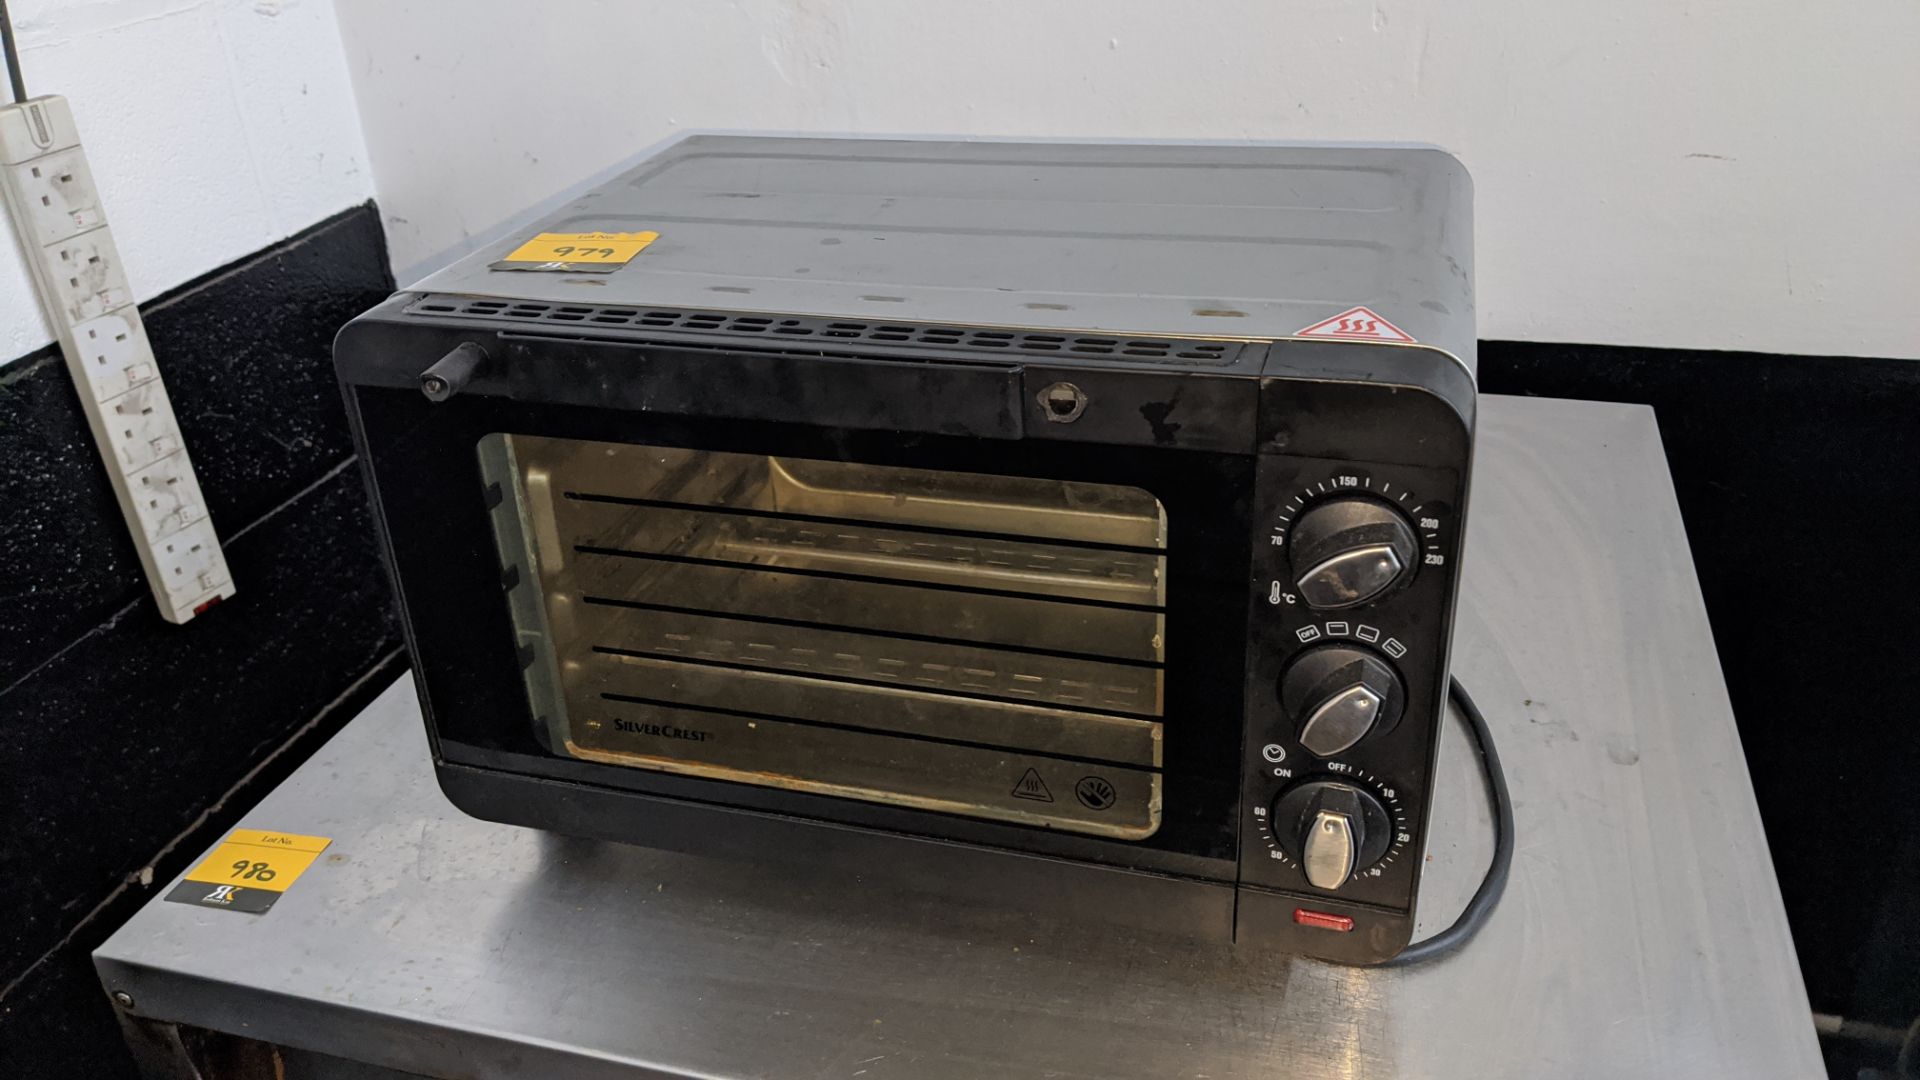 Silvercrest mini oven. IMPORTANT: Please remember goods successfully bid upon must be paid for and - Image 2 of 5